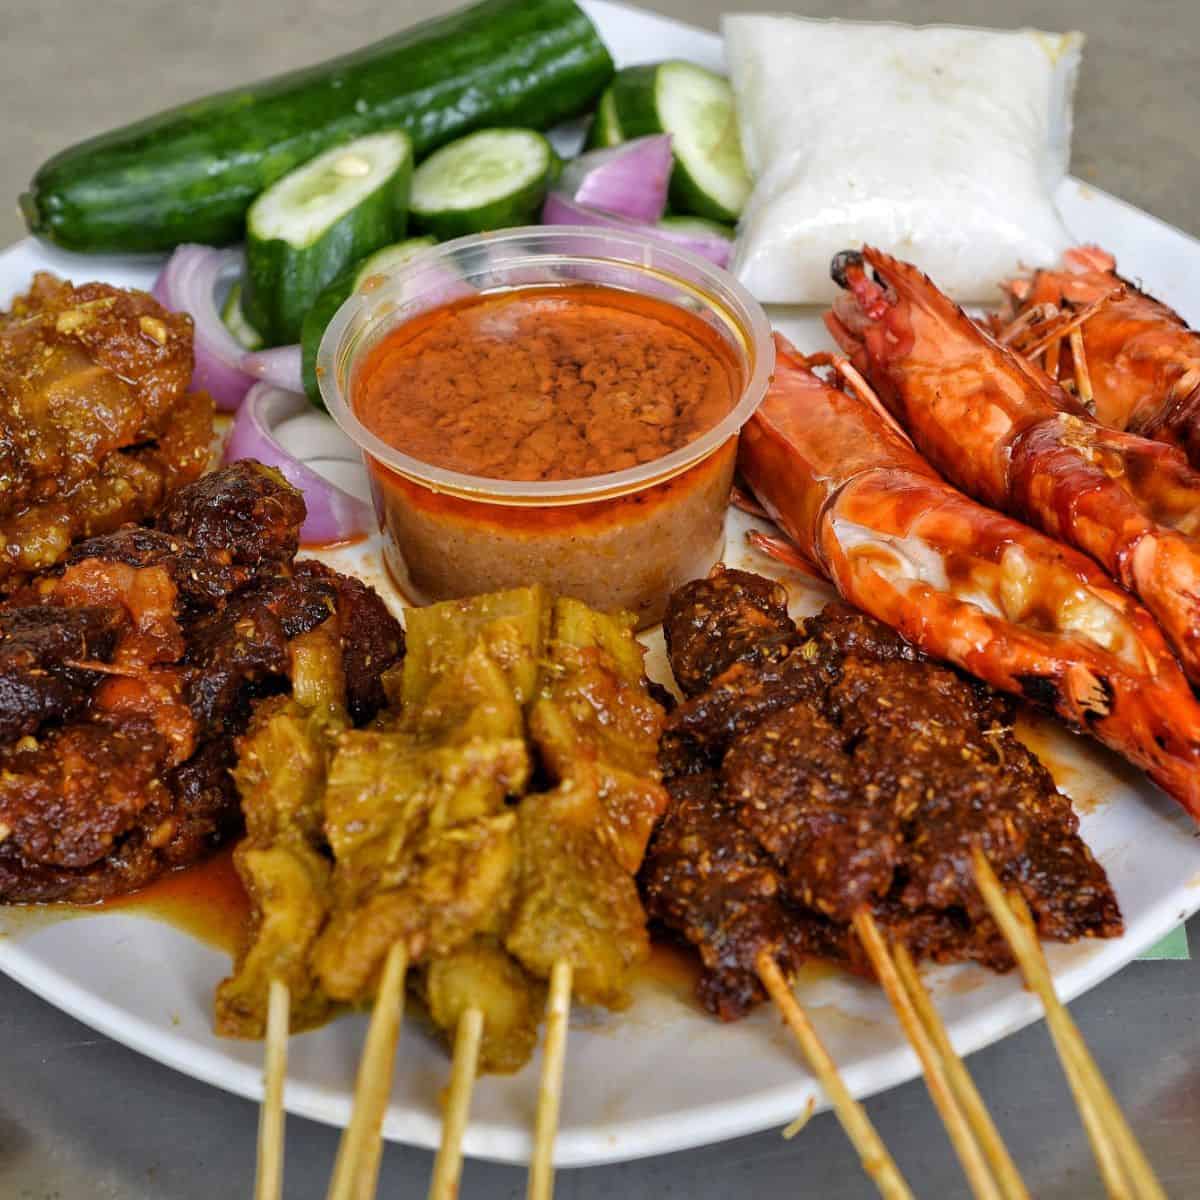 Alhambra Heritage & Original Satay Club Prawn satay and different skewers with chili dip in the middle and sliced cucumber on the side